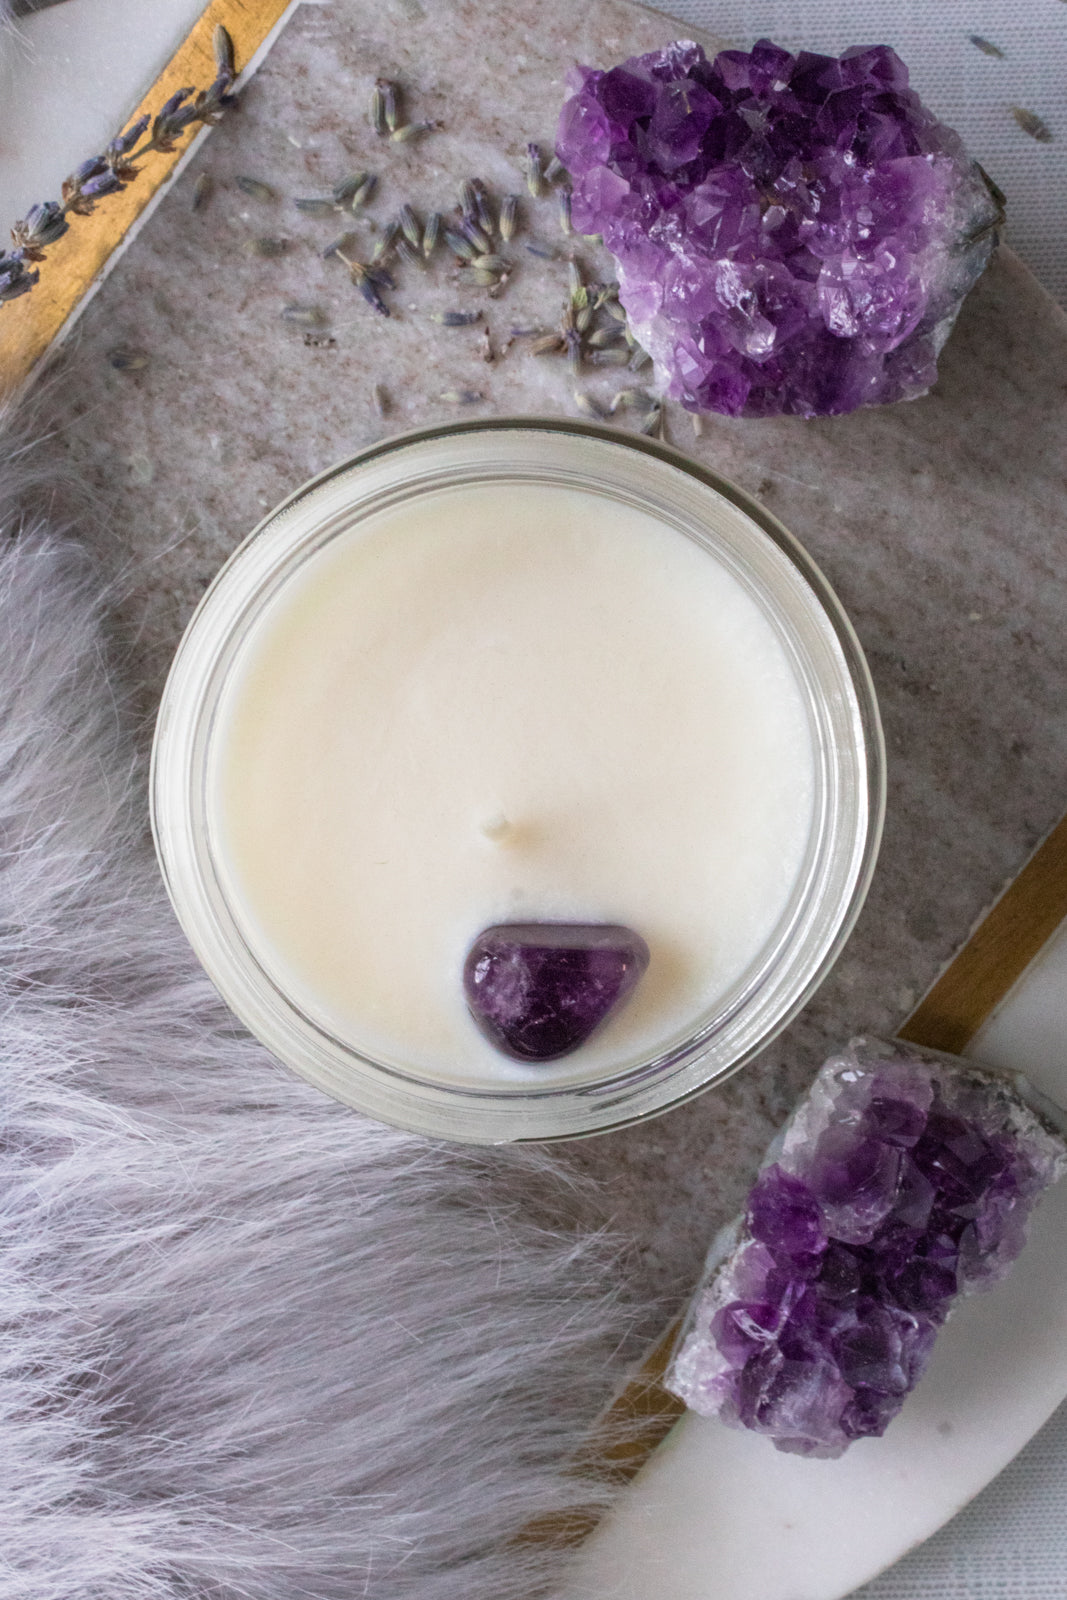 Serenity Candle: Lavender